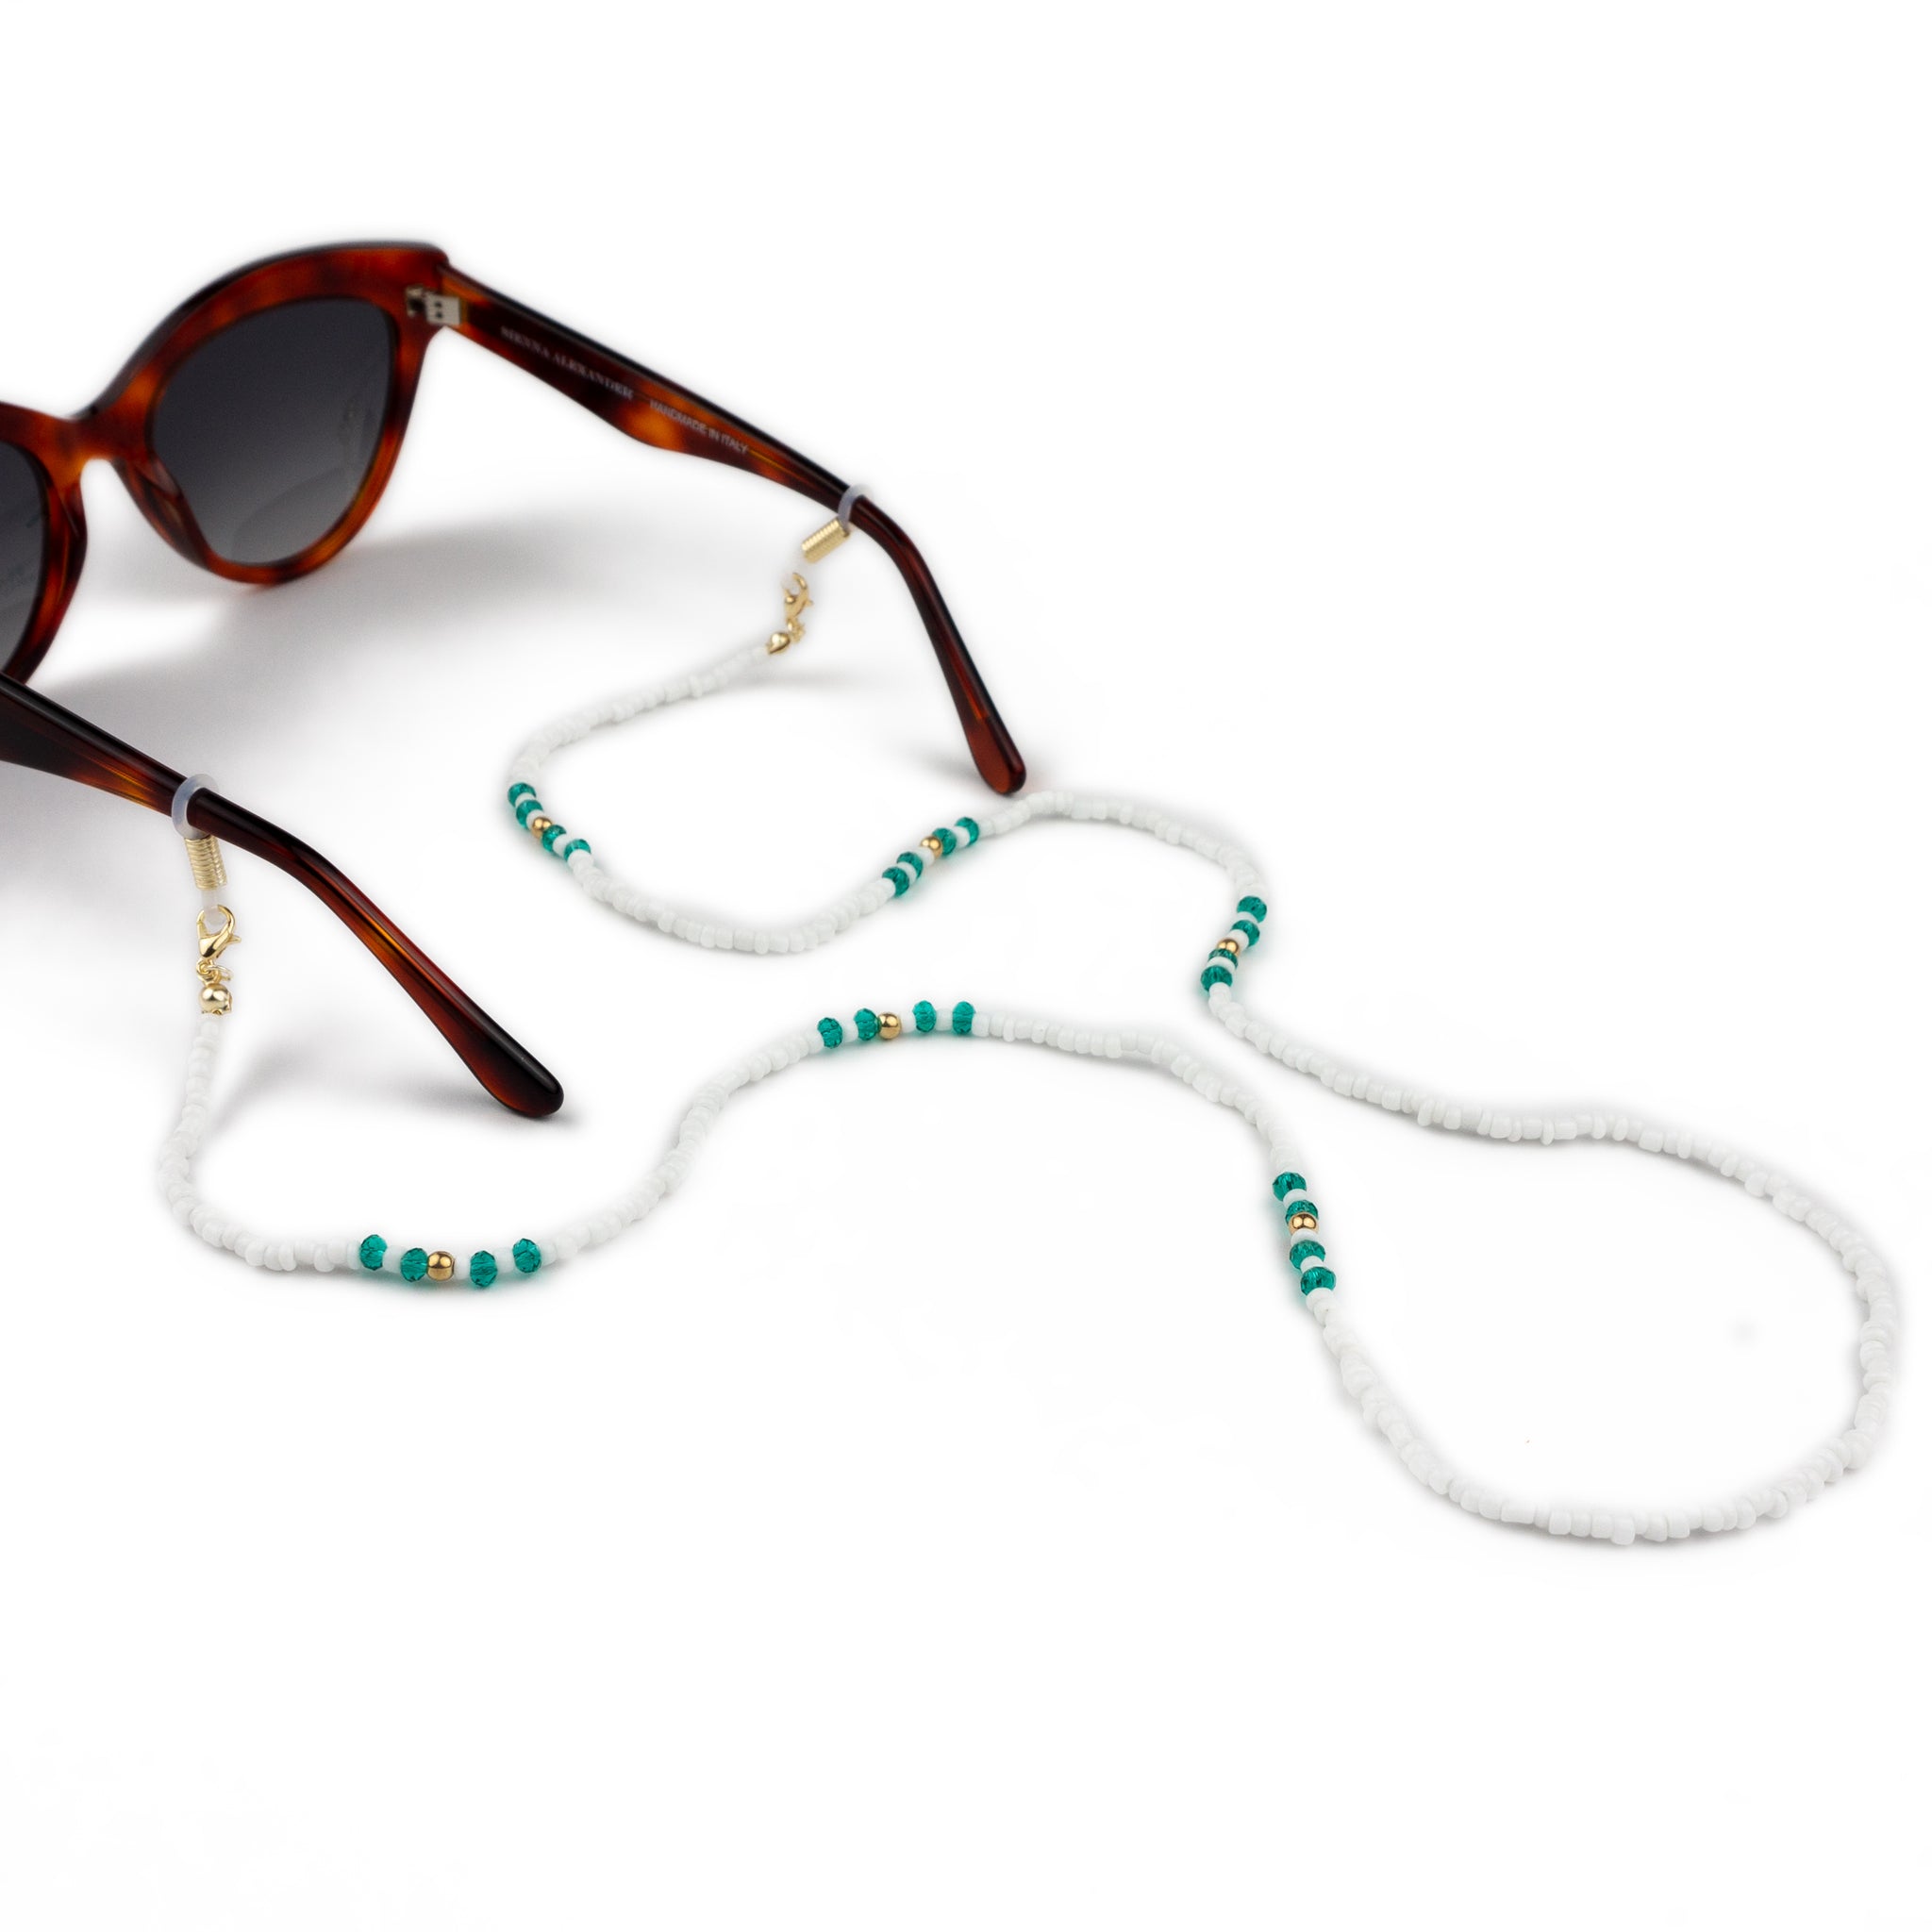 Sunglasses Chain | White and Turquoise Beaded - SIENNA ALEXANDER LONDON